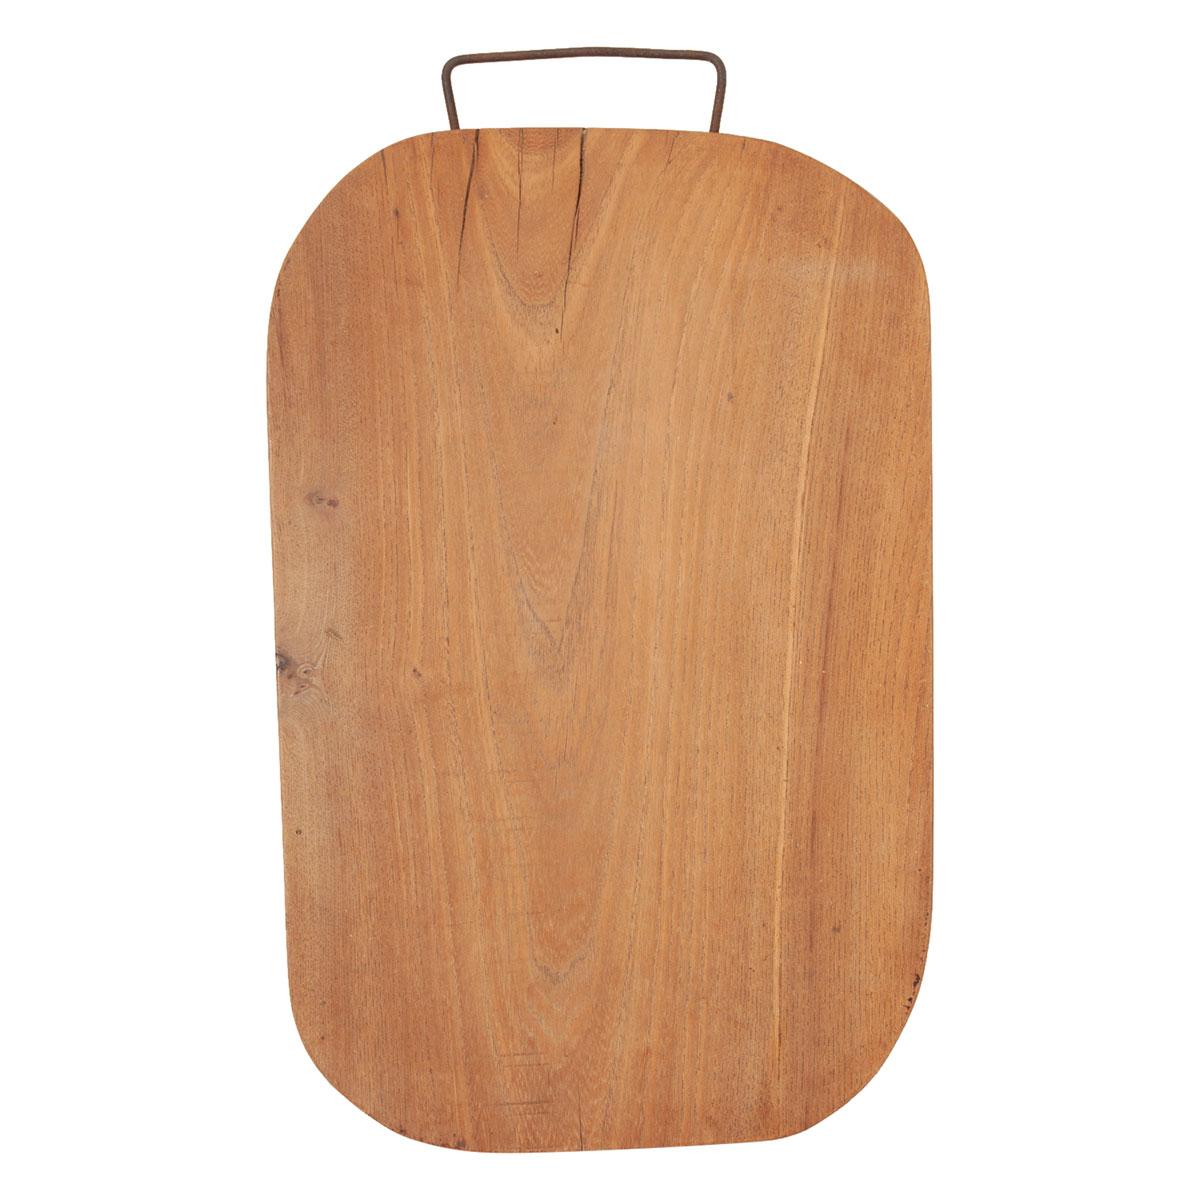 English 19th Century Solid Wood Cutting Board For Sale